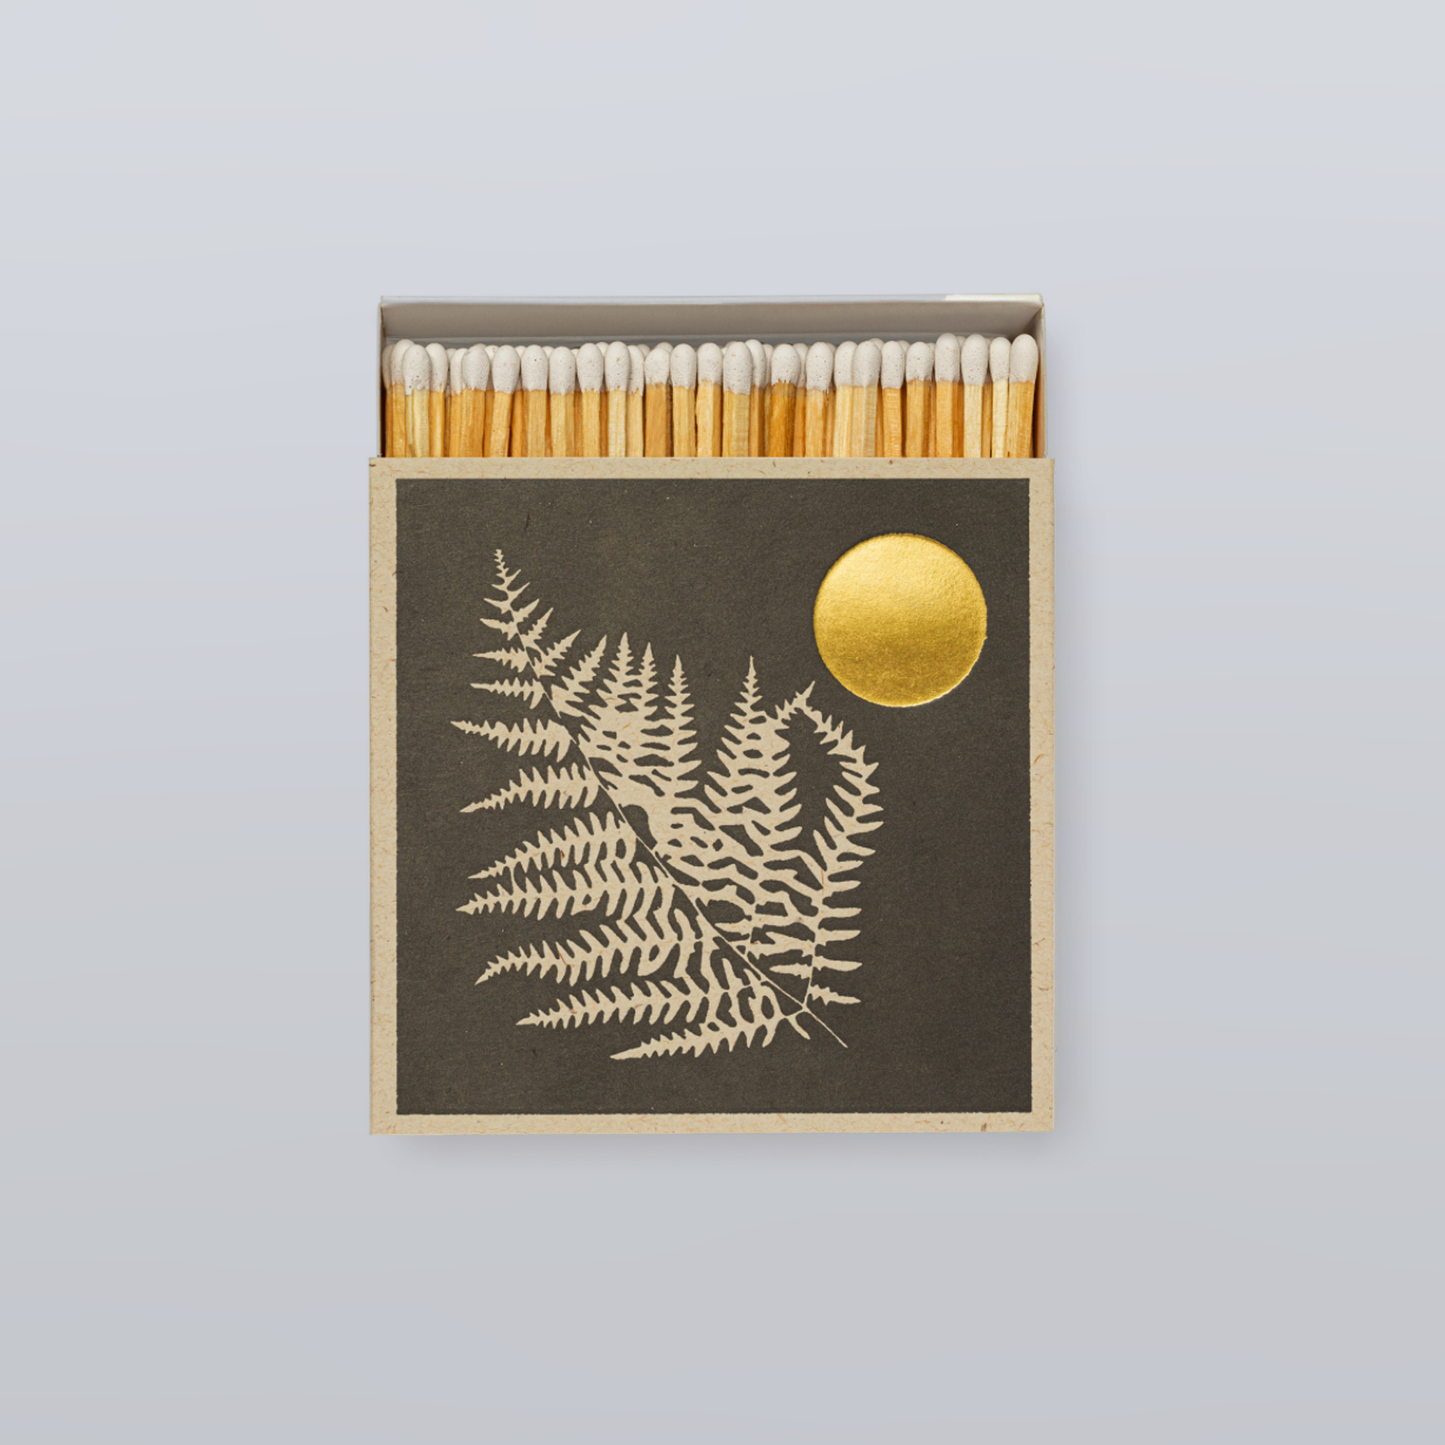 Matches | Square Box of Matches - Fern